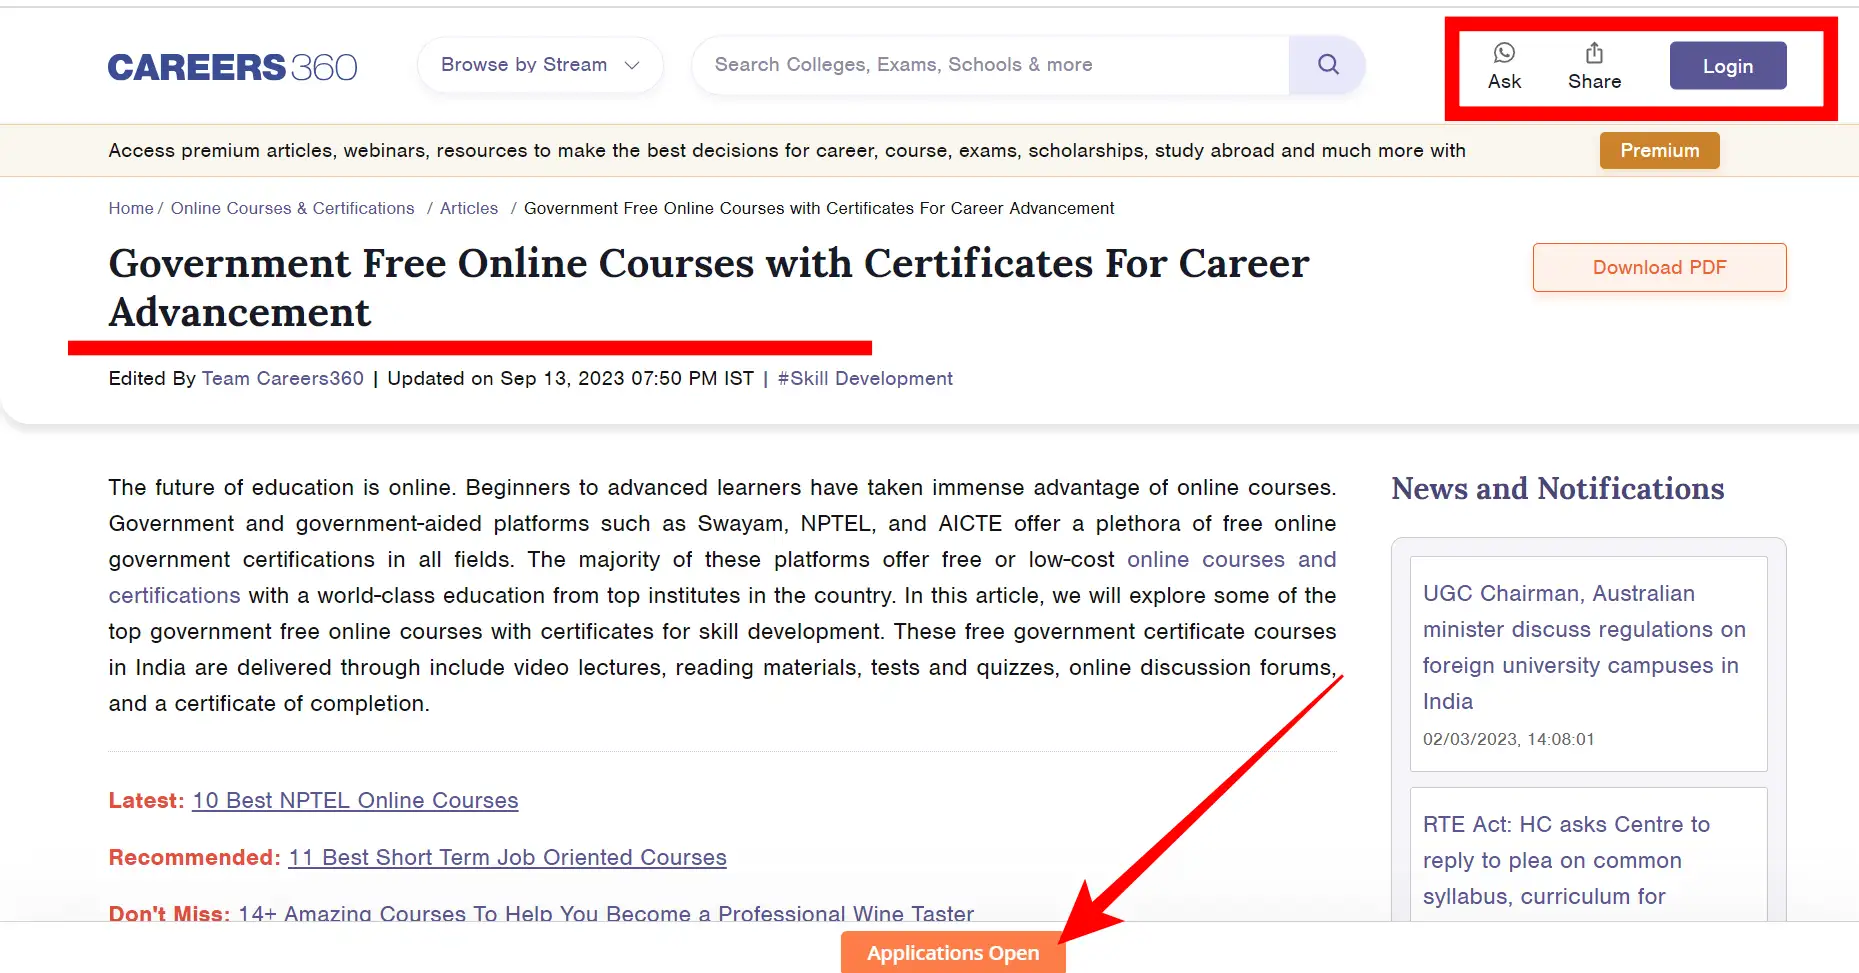 How to Apply for Free Certificate Course By Government Online